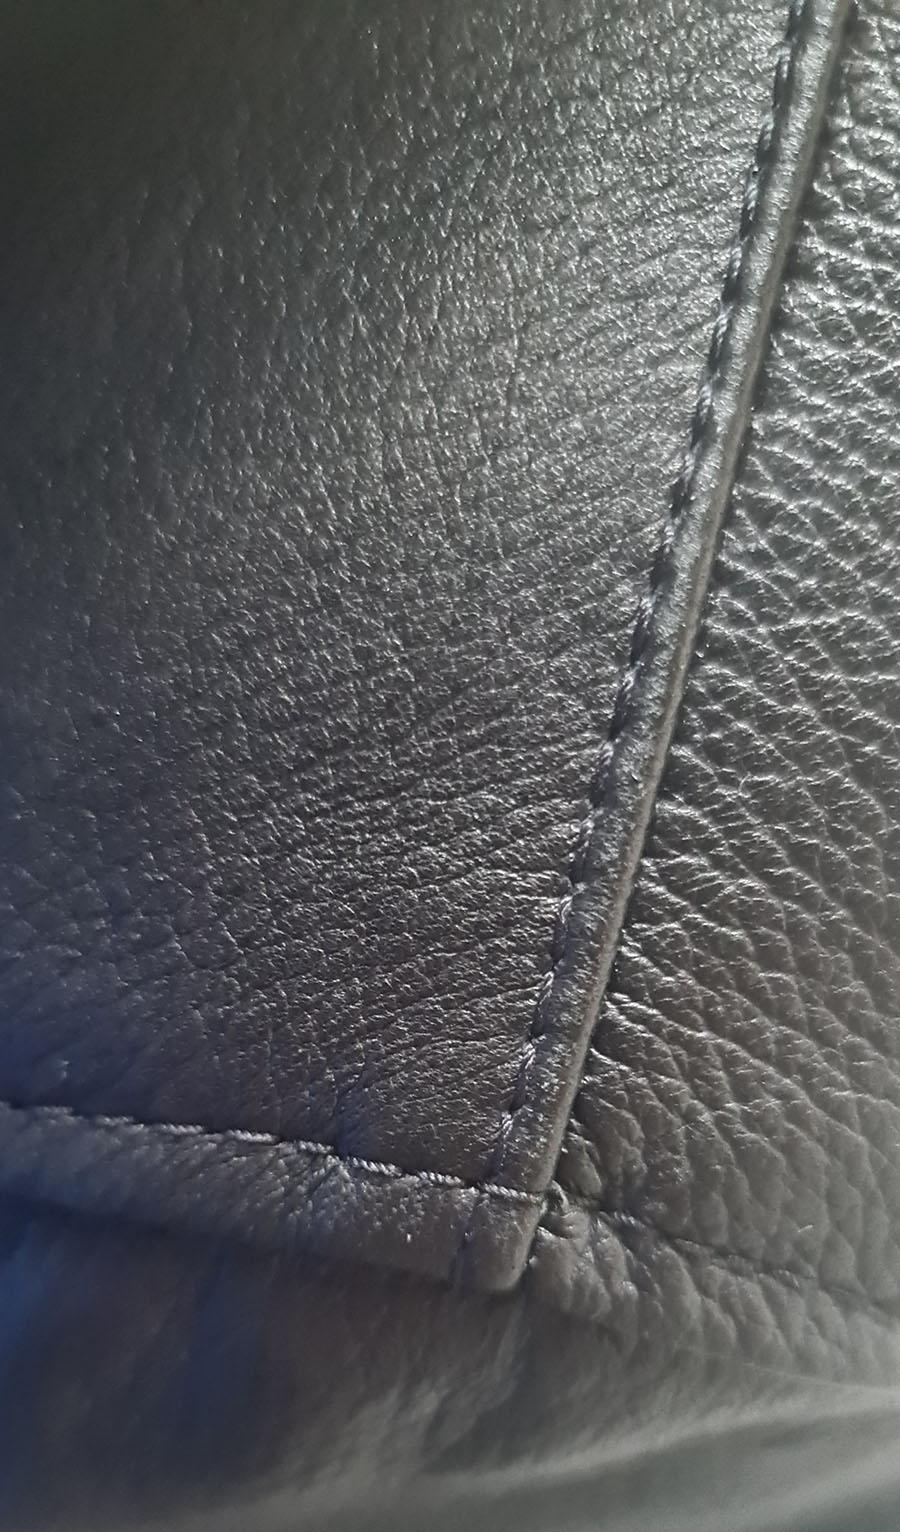 Can a leather worker repair this hole to a point that it doesn't look  noticeable? : r/Louisvuitton